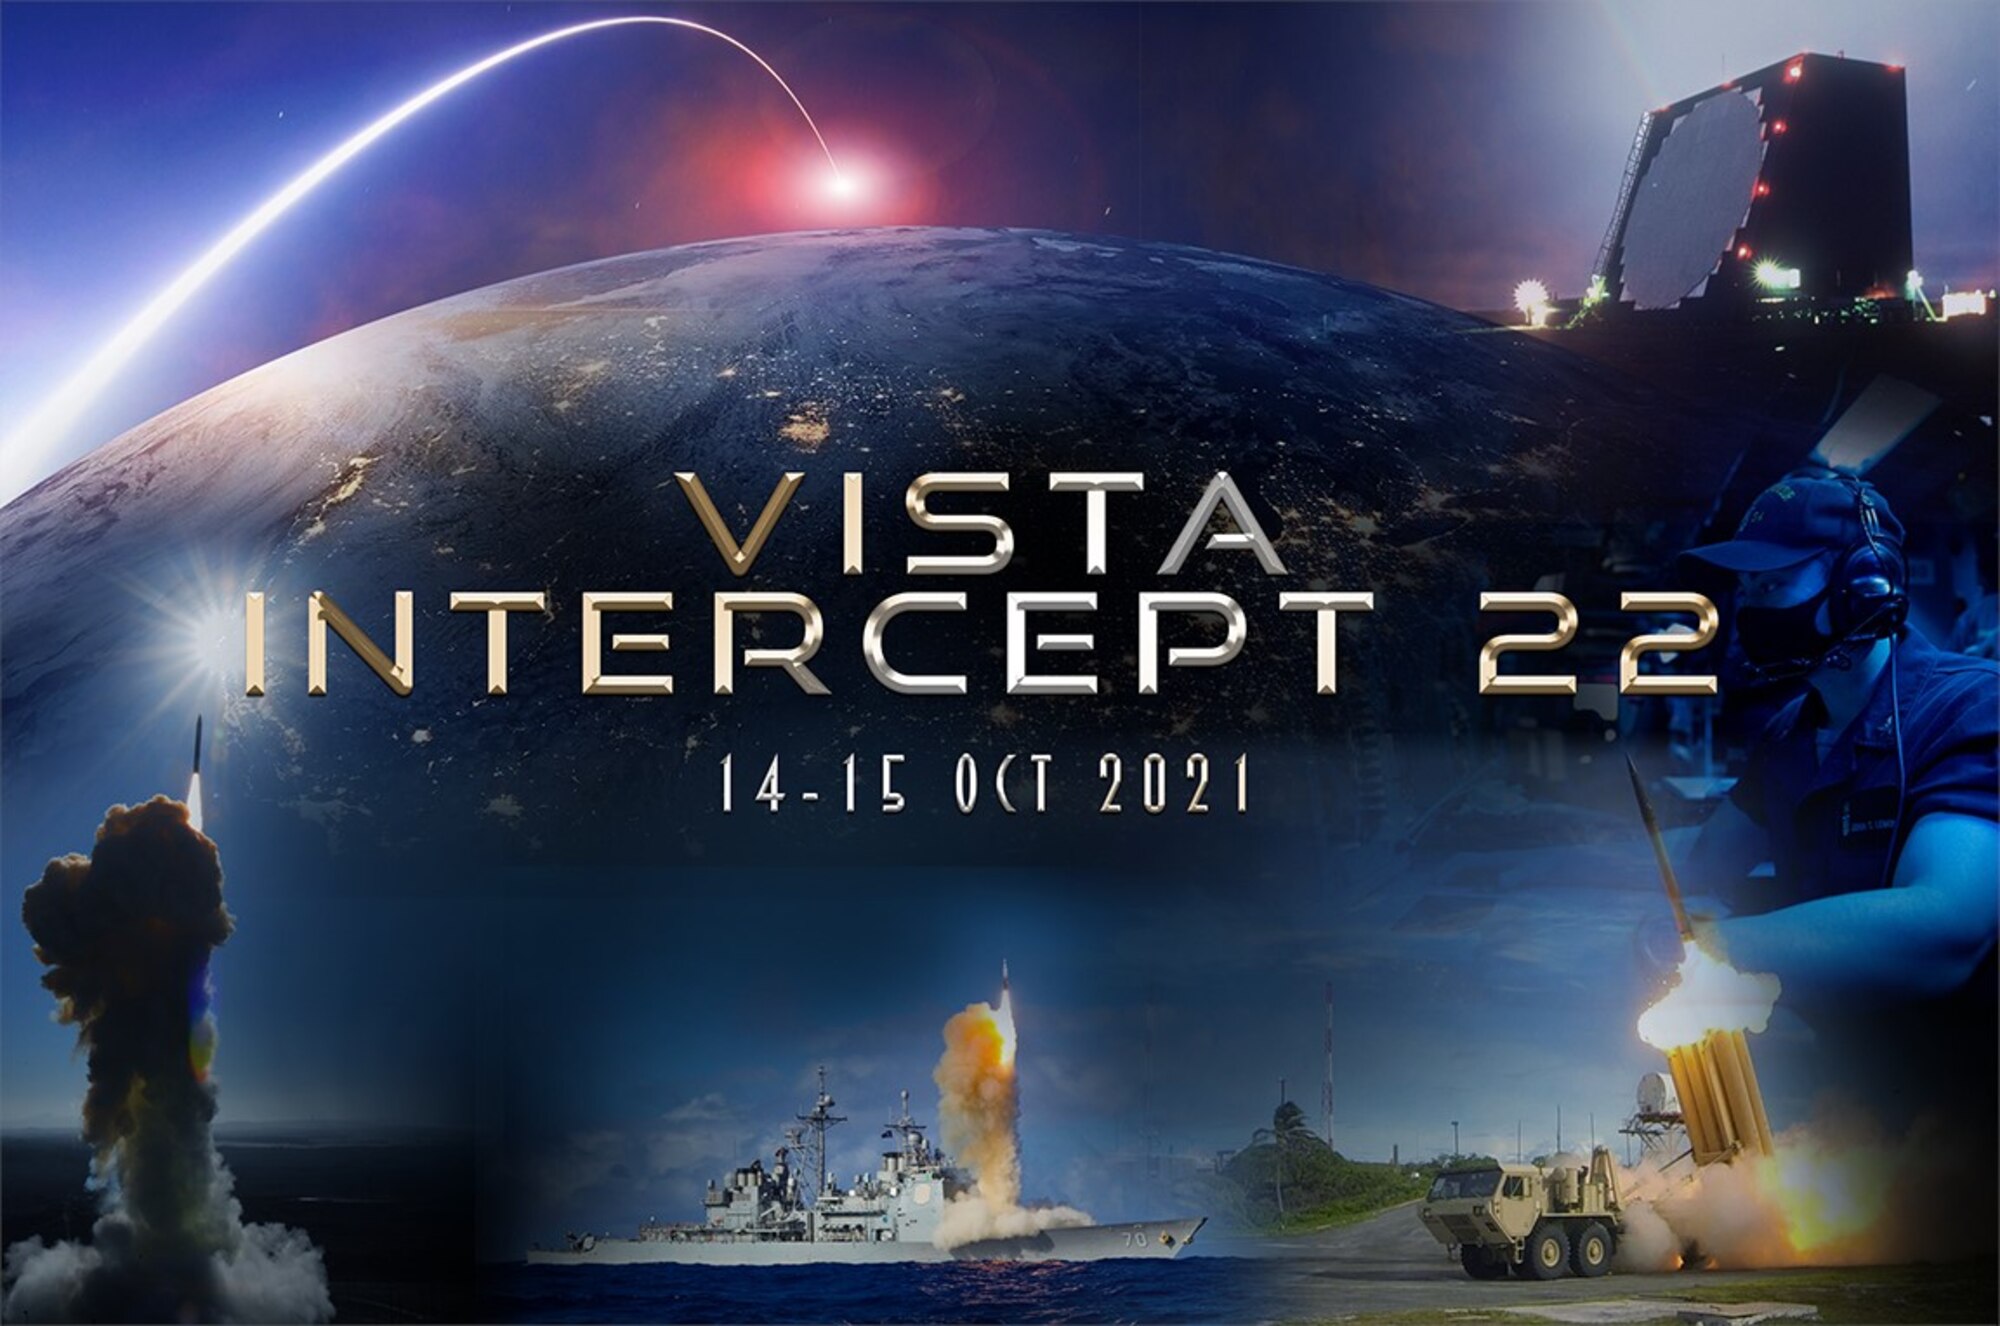 Ballistic missile defense is a critical mission for defending North America. Vista Intercept 22 provided a forum for participants to evaluate NORAD’s threat warning and assessment capabilities and U.S. Northern Command’s ballistic missile defense, integrated deterrence and additional capabilities required to defeat complex threats.